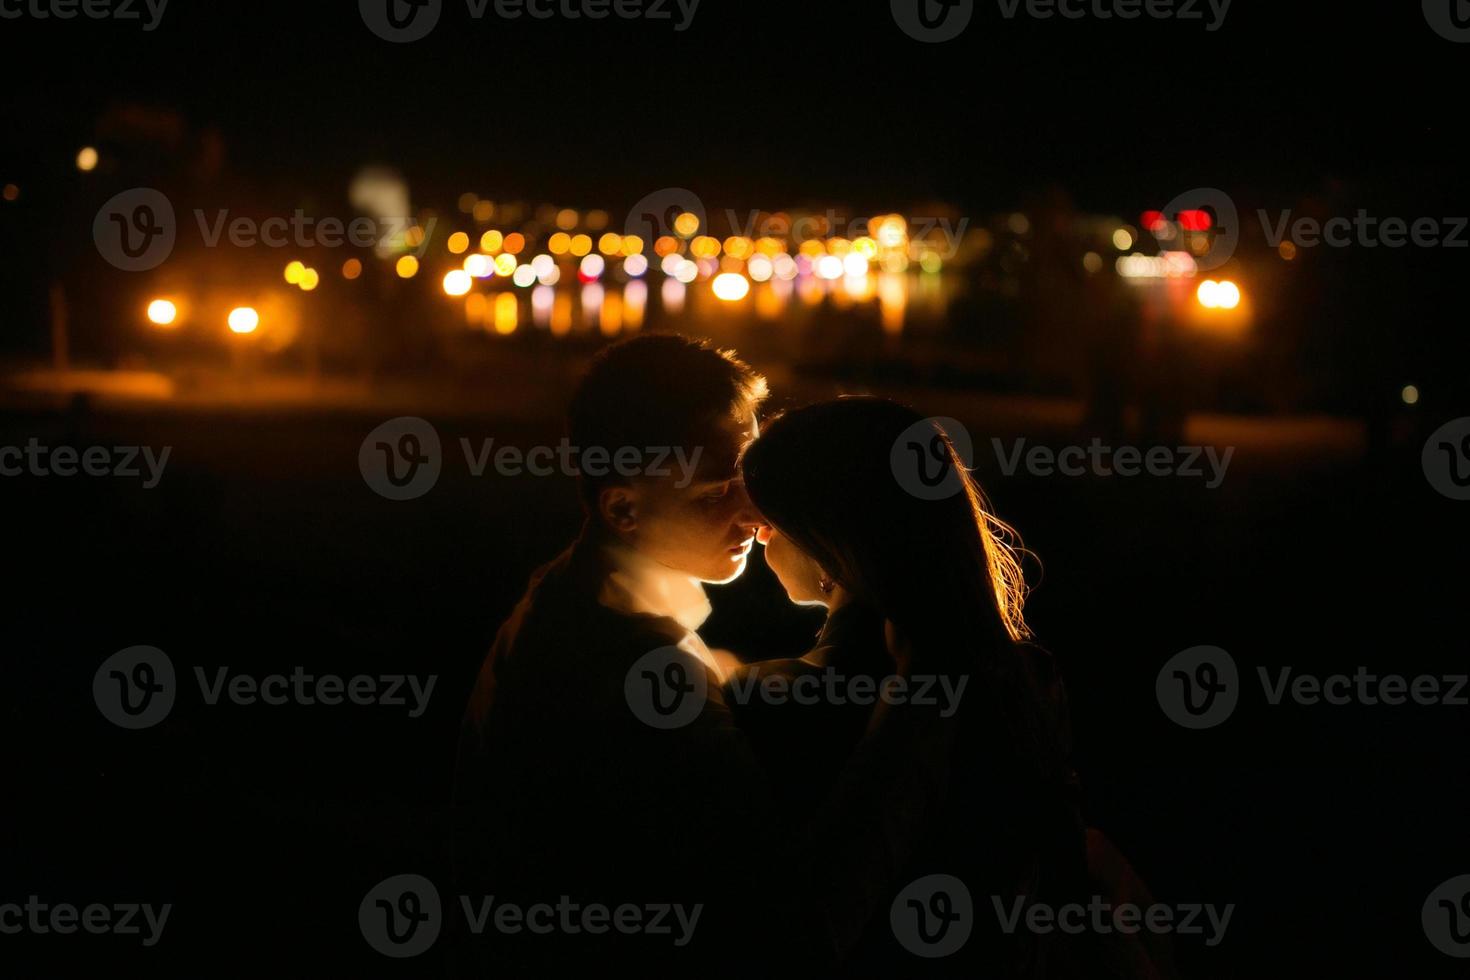 Couple at the night city photo